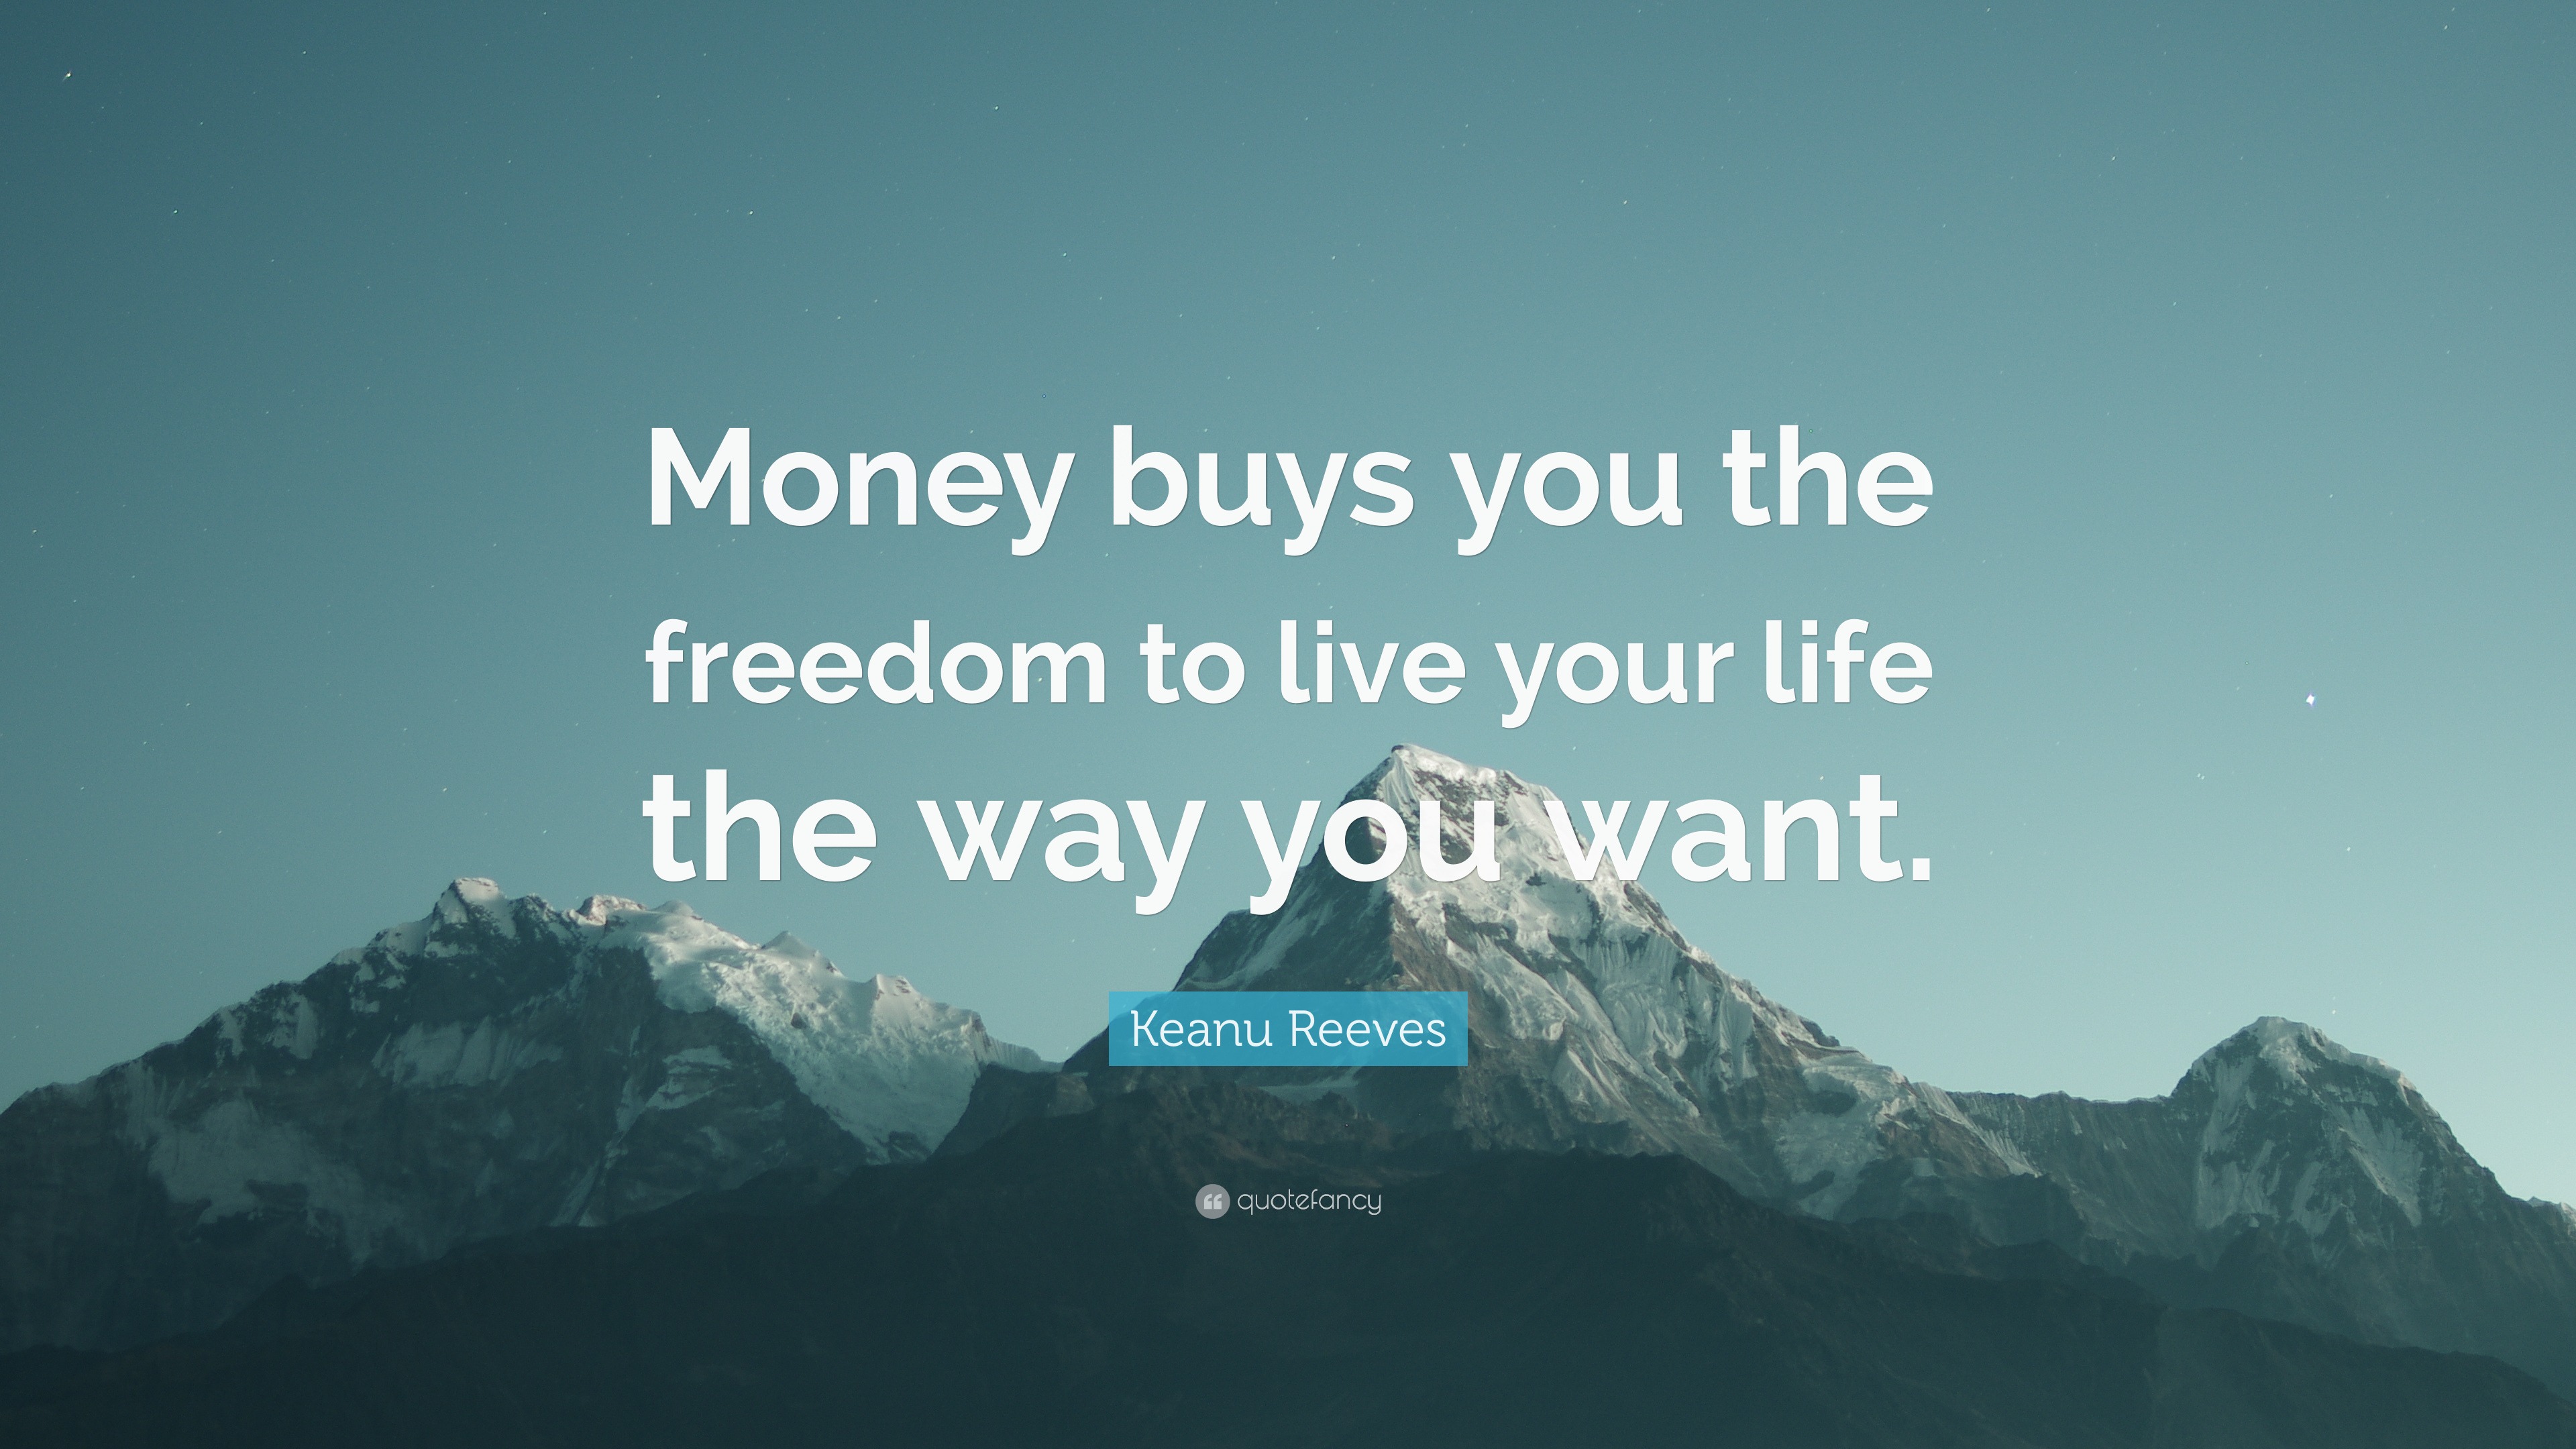 Keanu Reeves Quote “Money s you the freedom to live your life the way